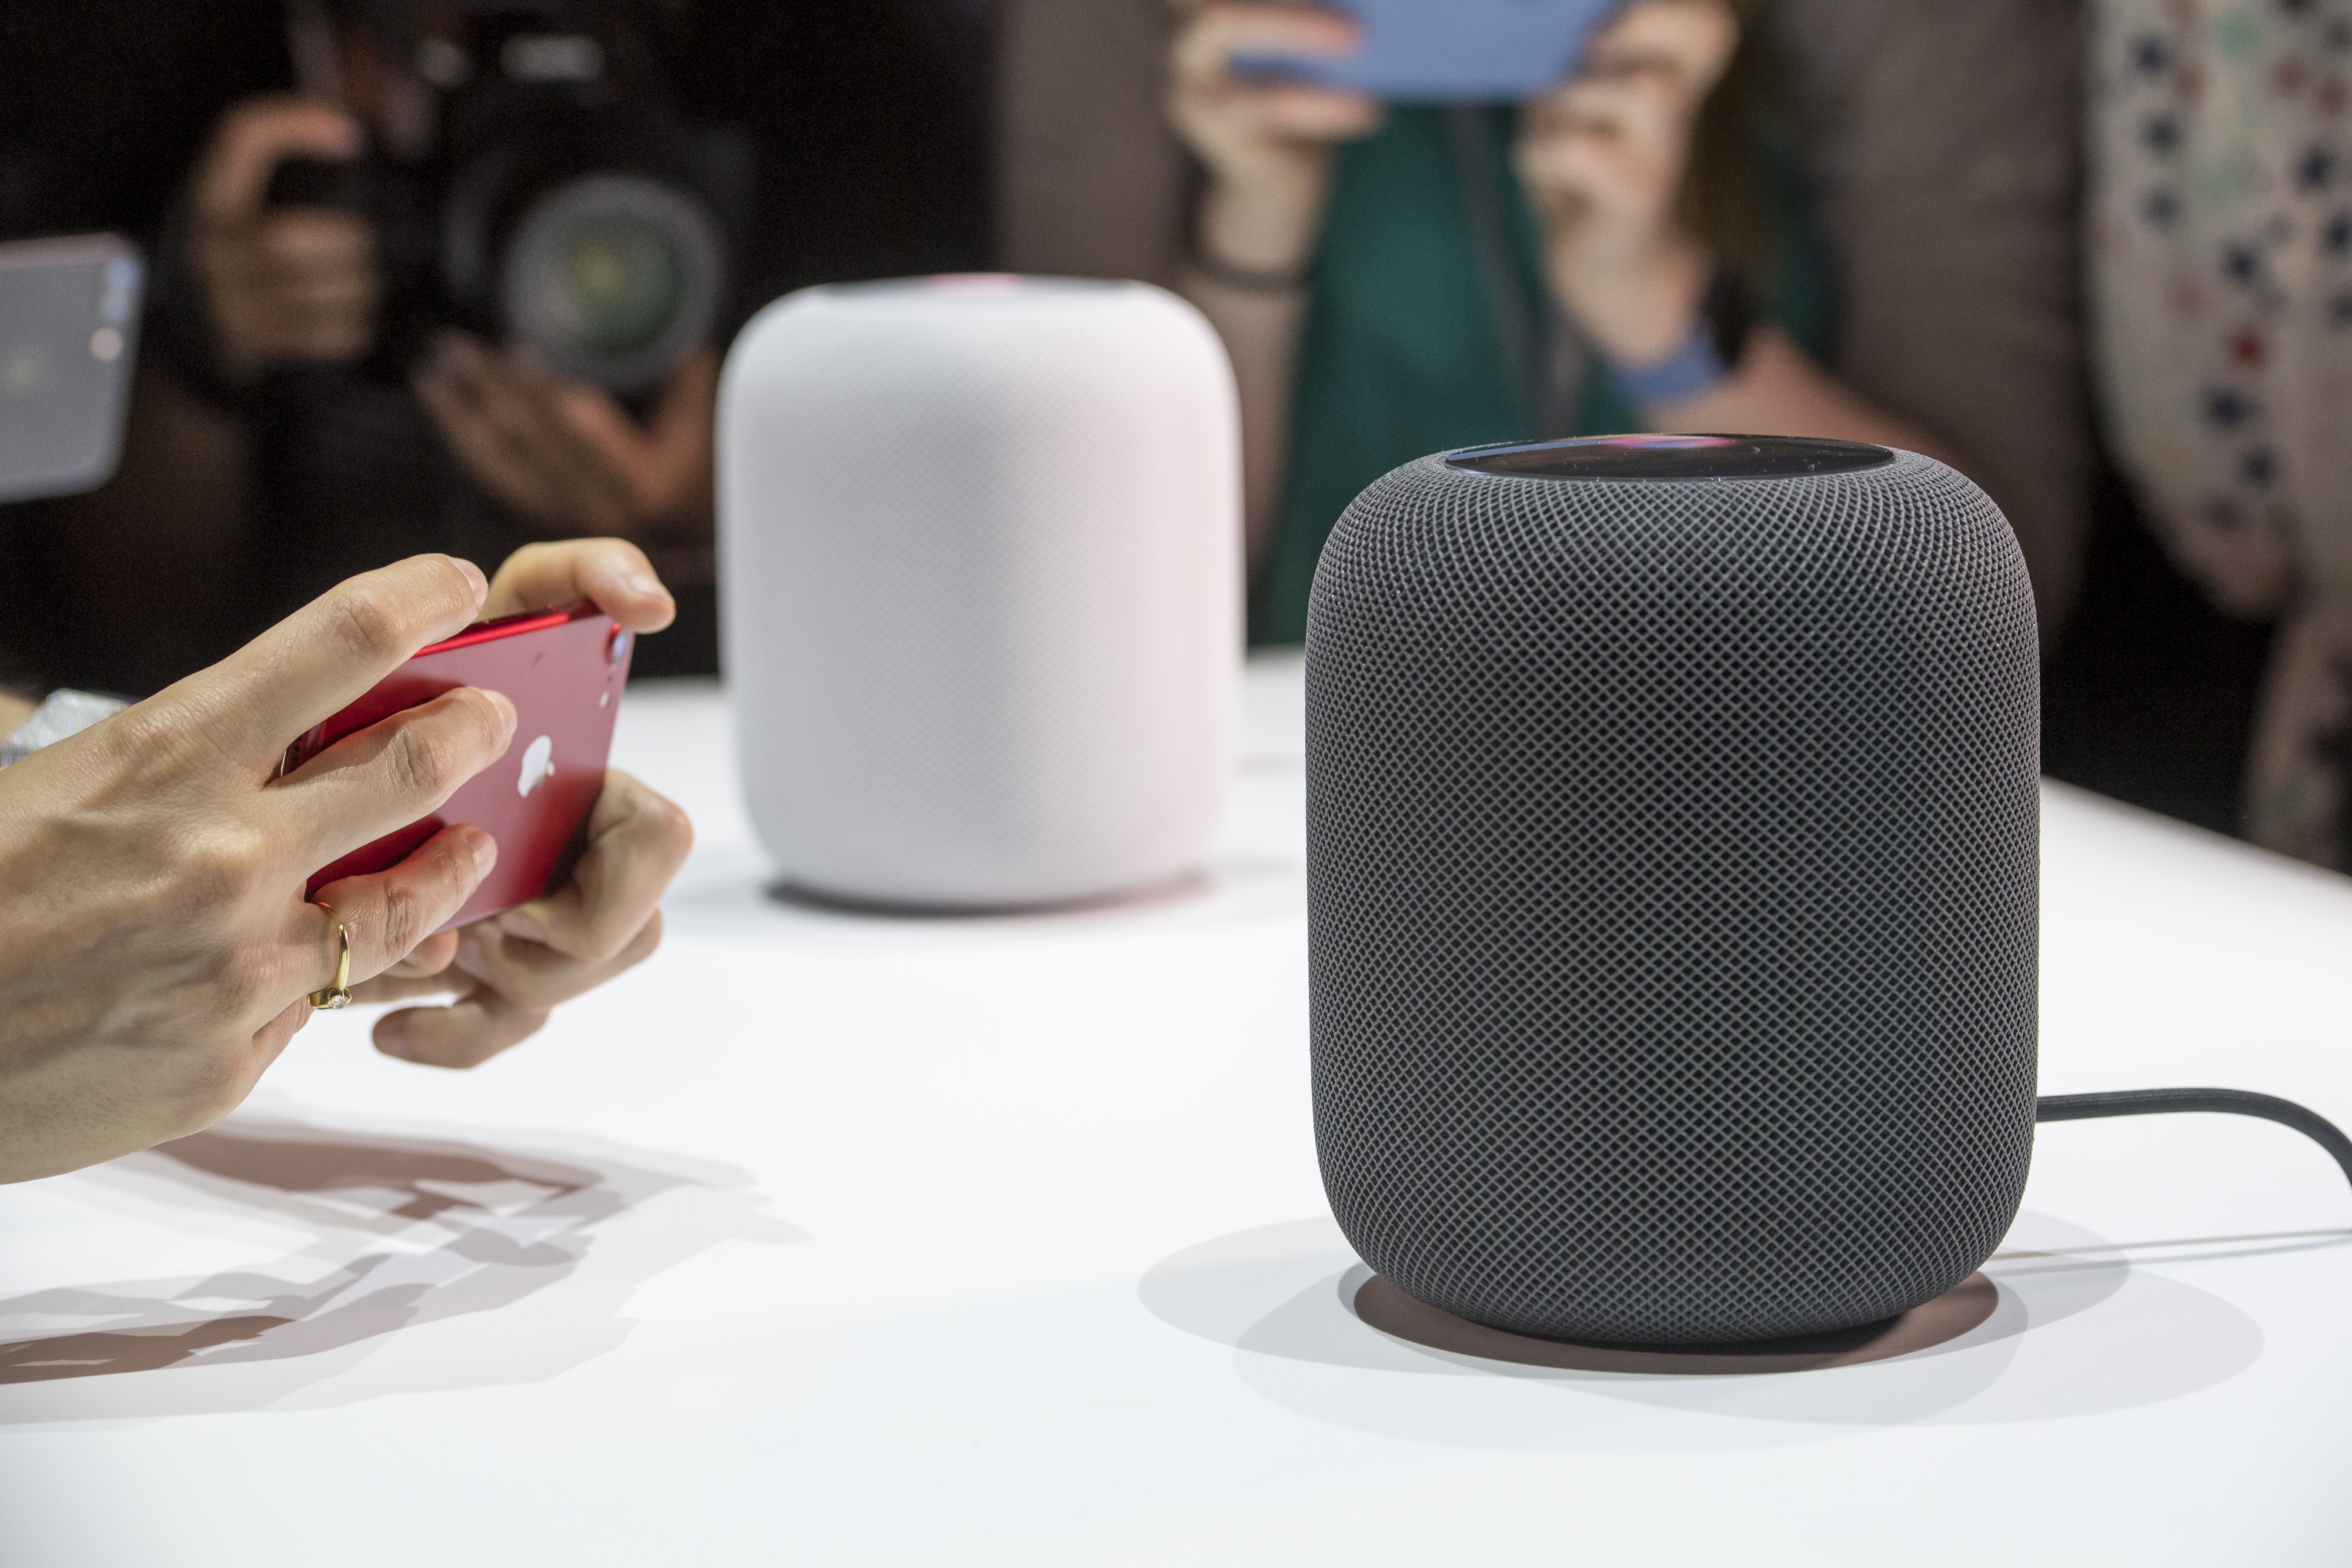 Australia among first to get Apple HomePod, Feb 9 confirmed as launch date